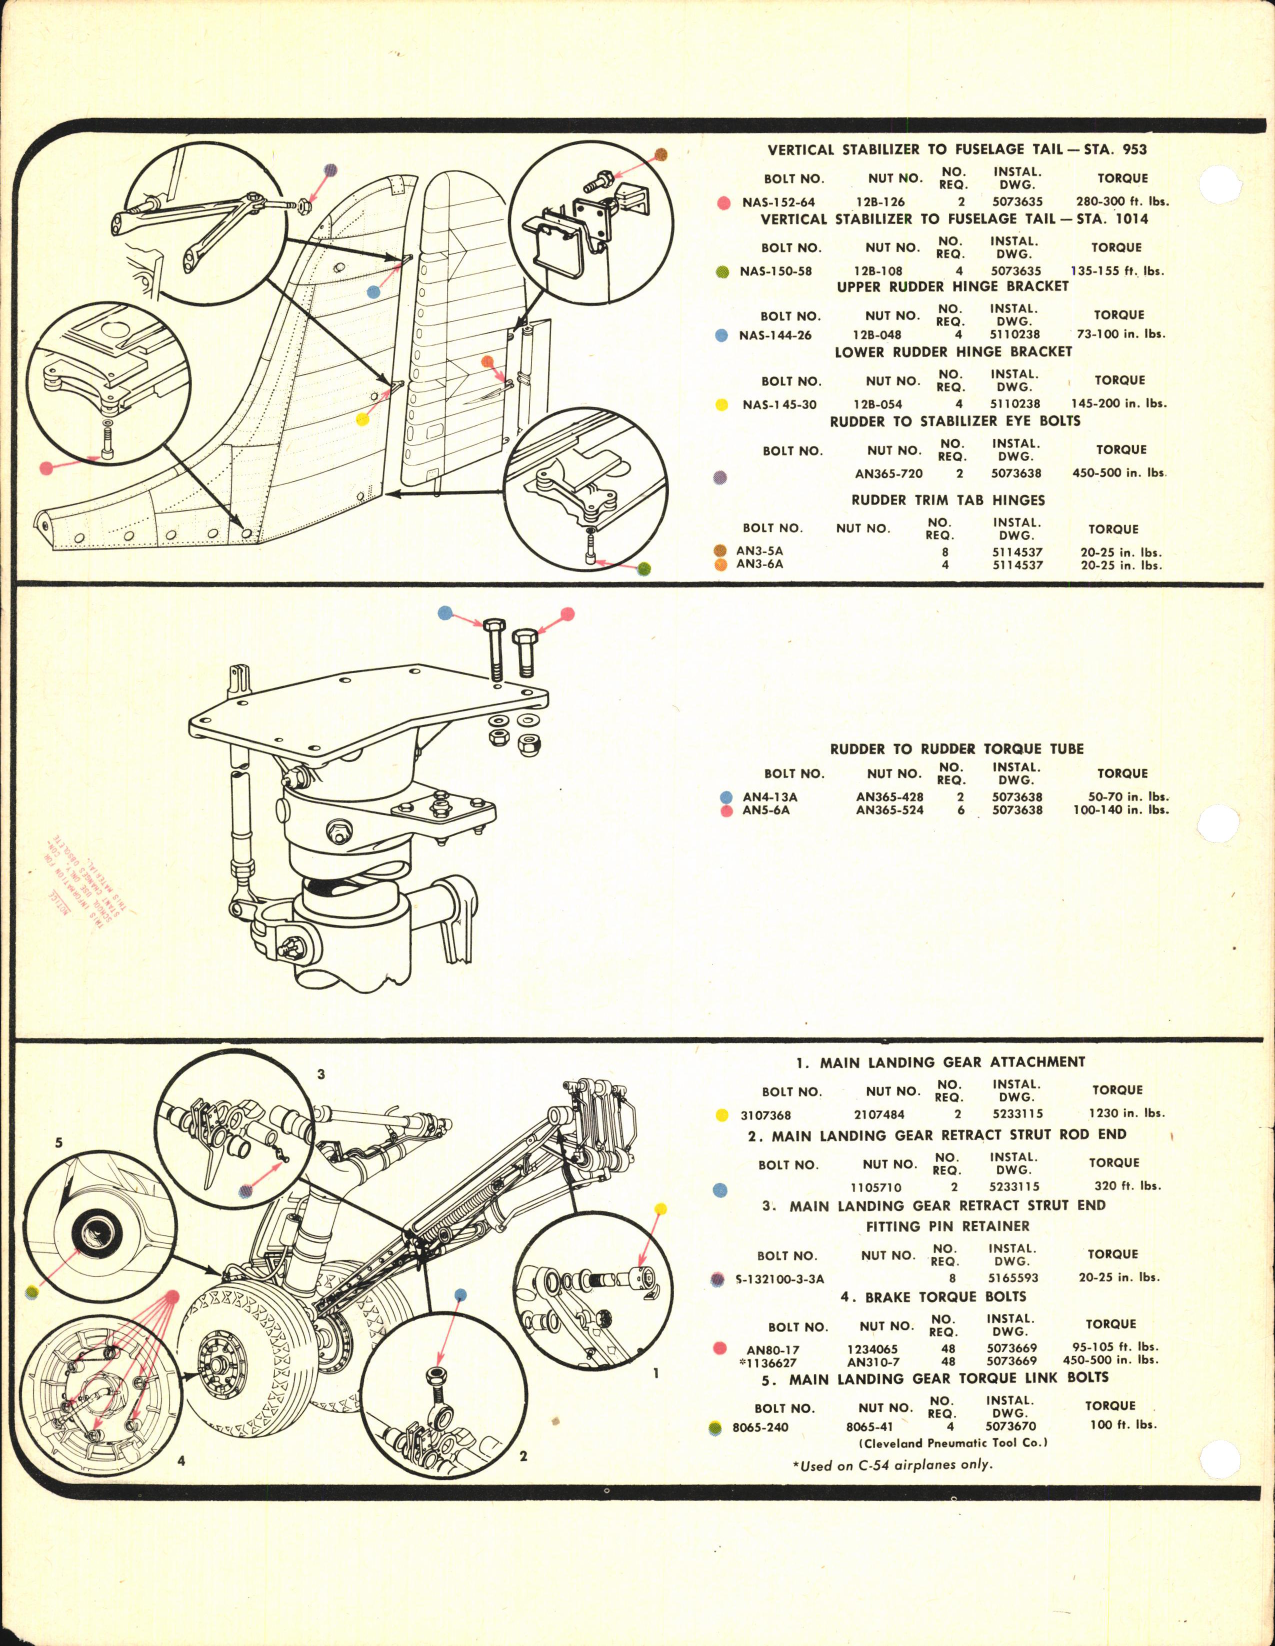 Sample page 8 from AirCorps Library document: C-54, C-54A, and C-54B Torque Values